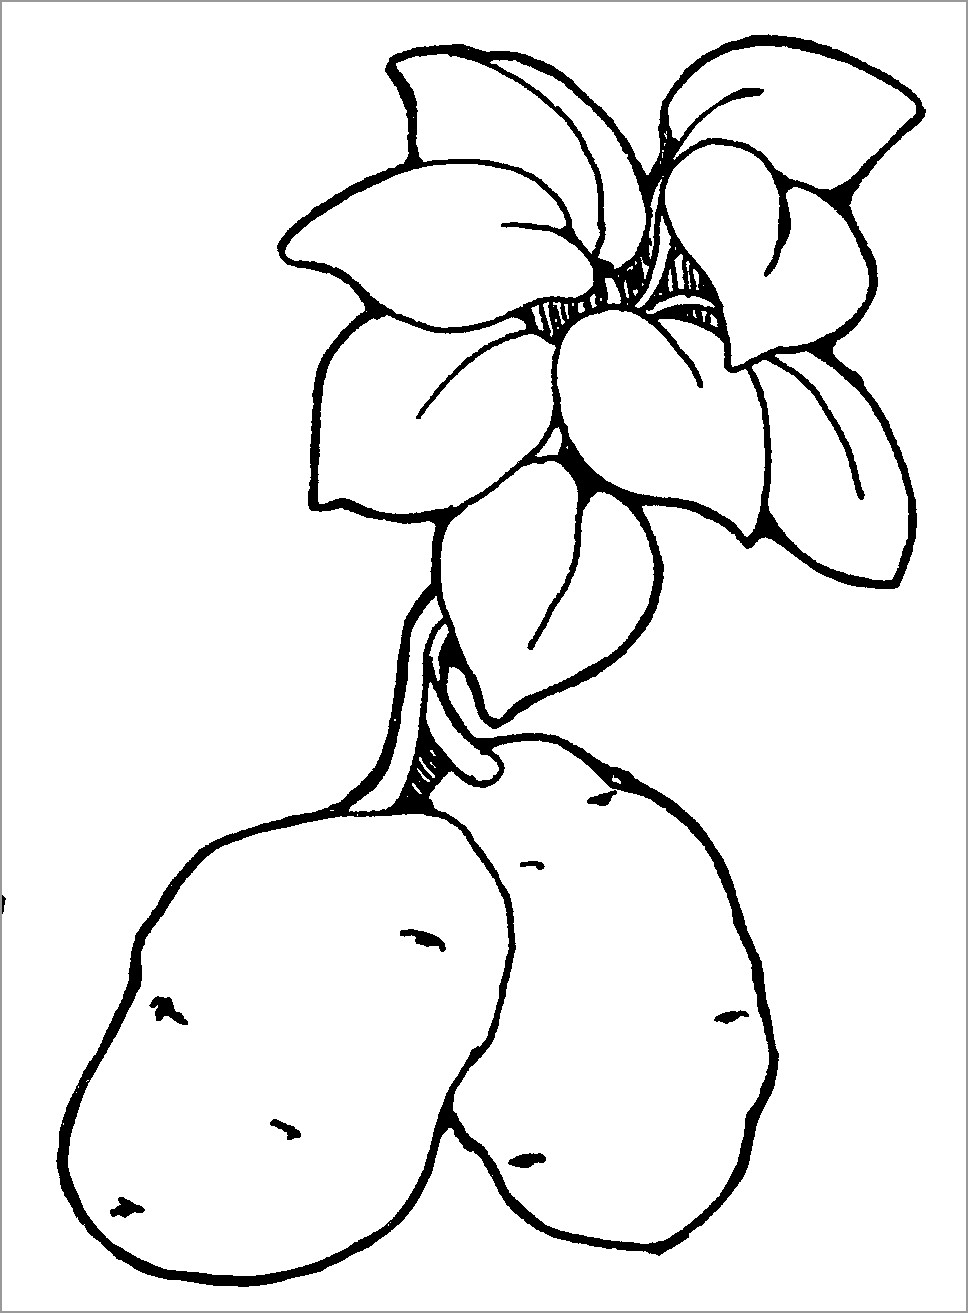 Potato Plant Coloring Page for Kids